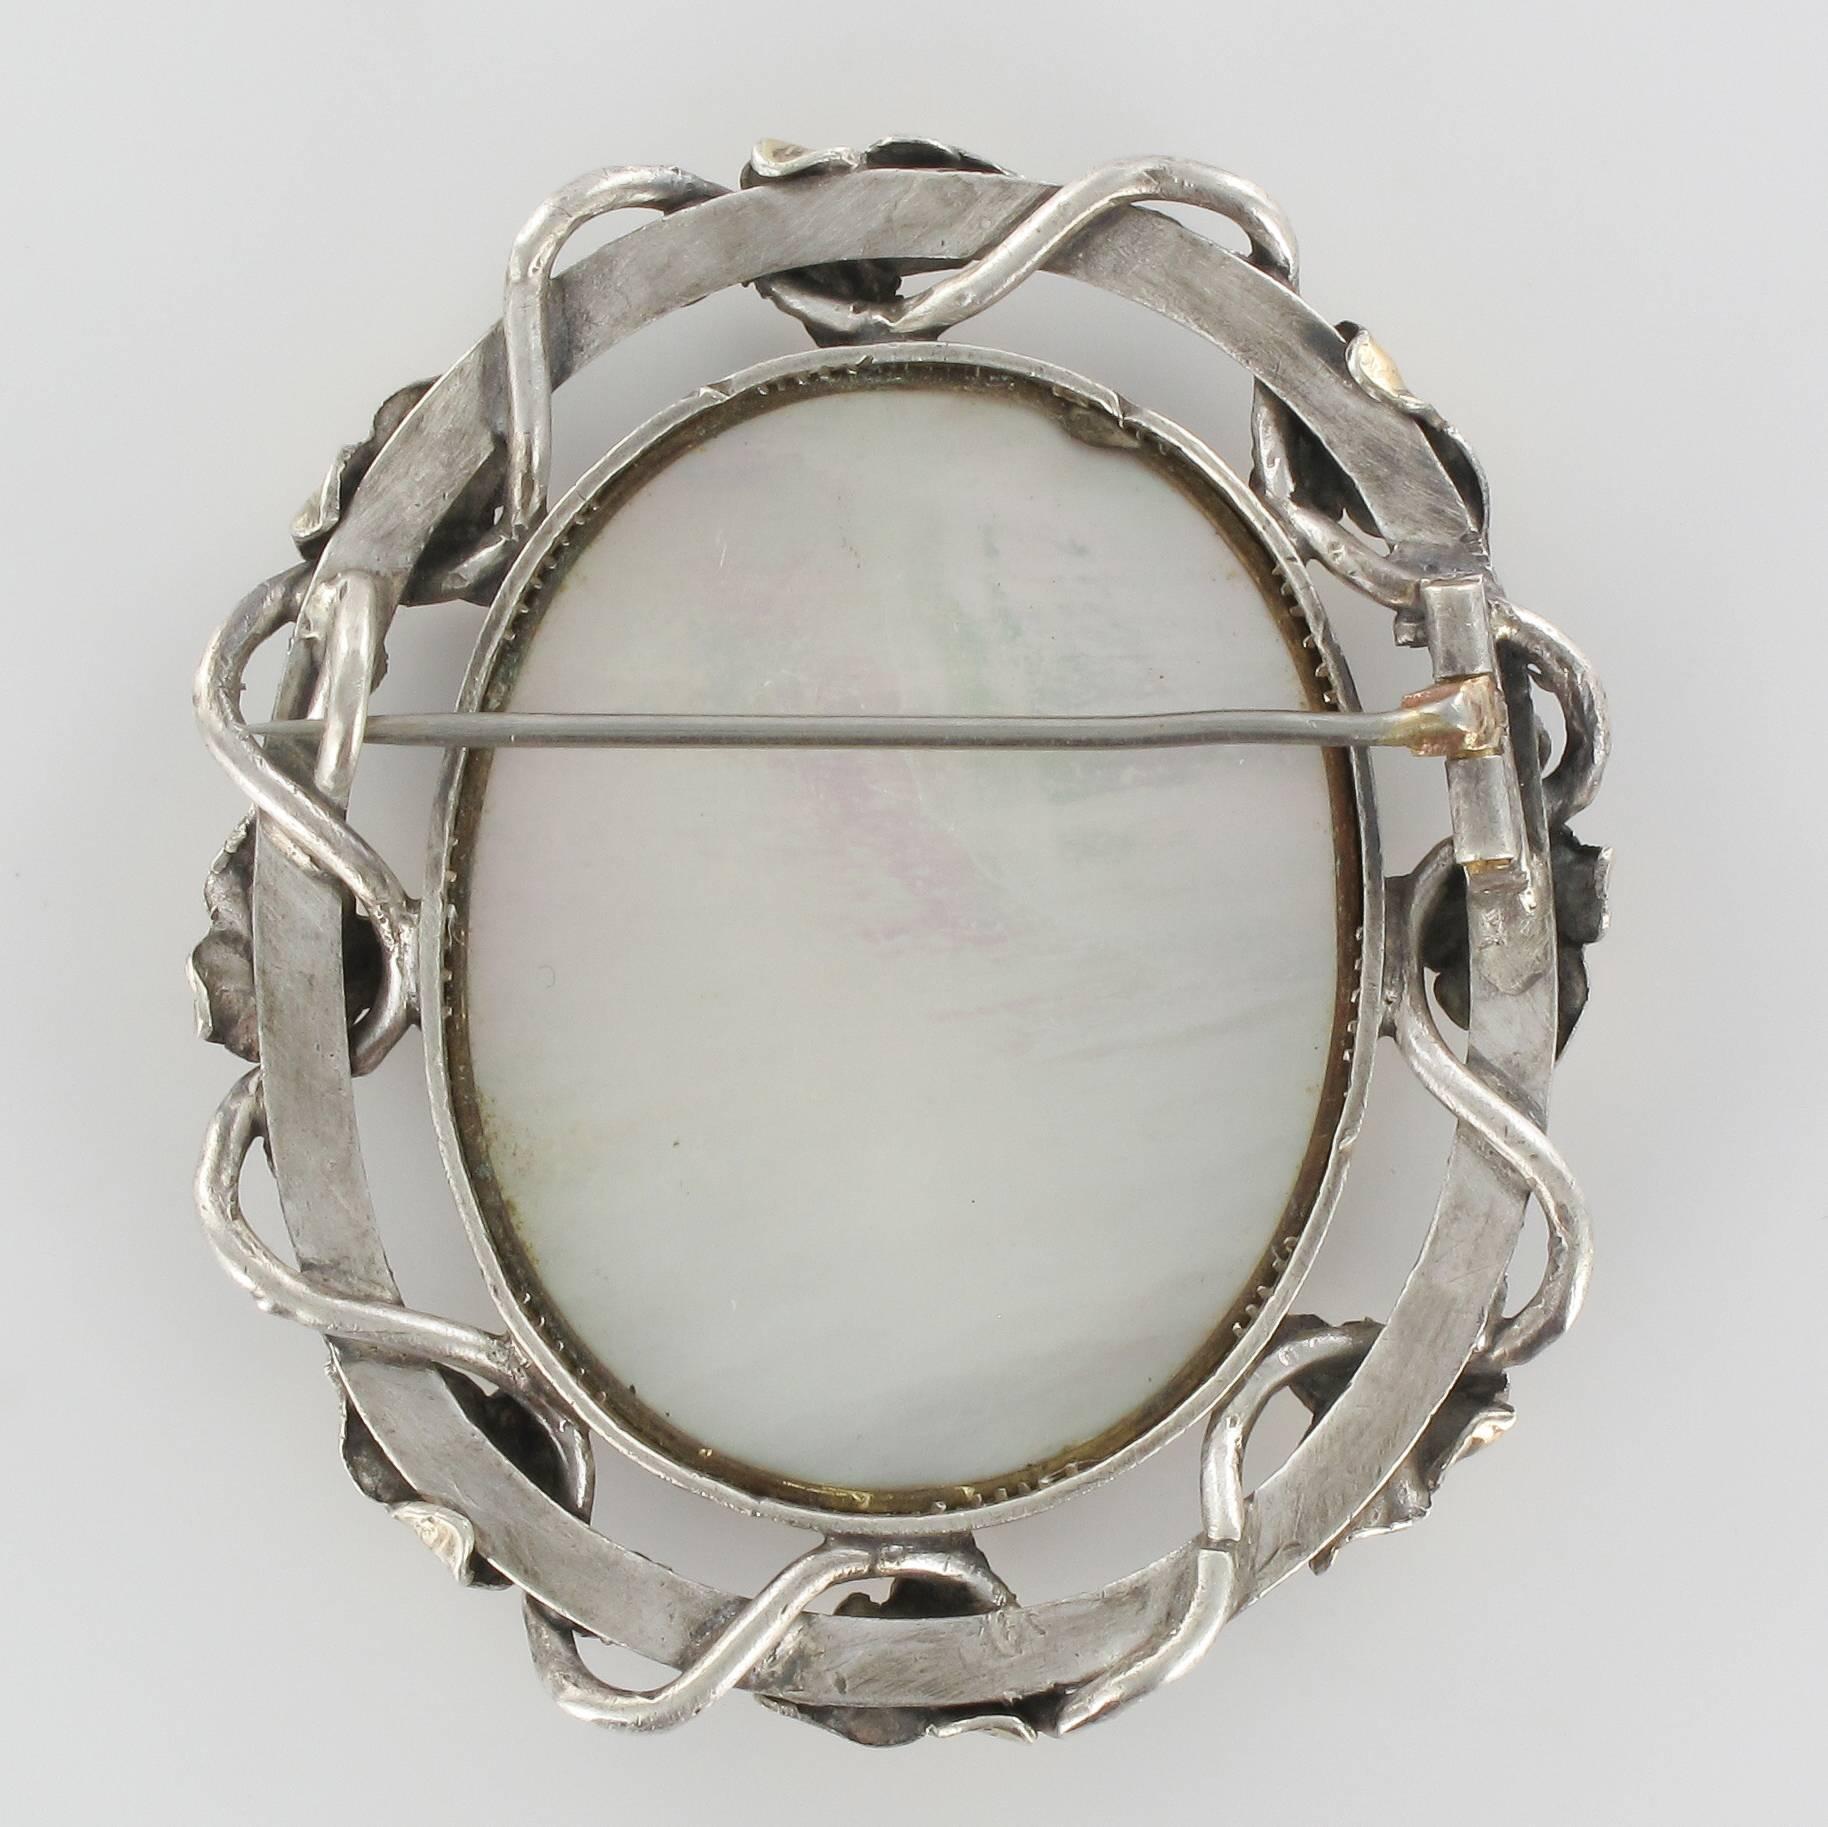 Brooch in silver and 18 carats yellow gold.
This rare antique memory brooch is composed of an oval motif made of braided hair on a mother-of-pearl tablet set with initials and protected by a glass. The whole is surrounded by a vegetable decoration